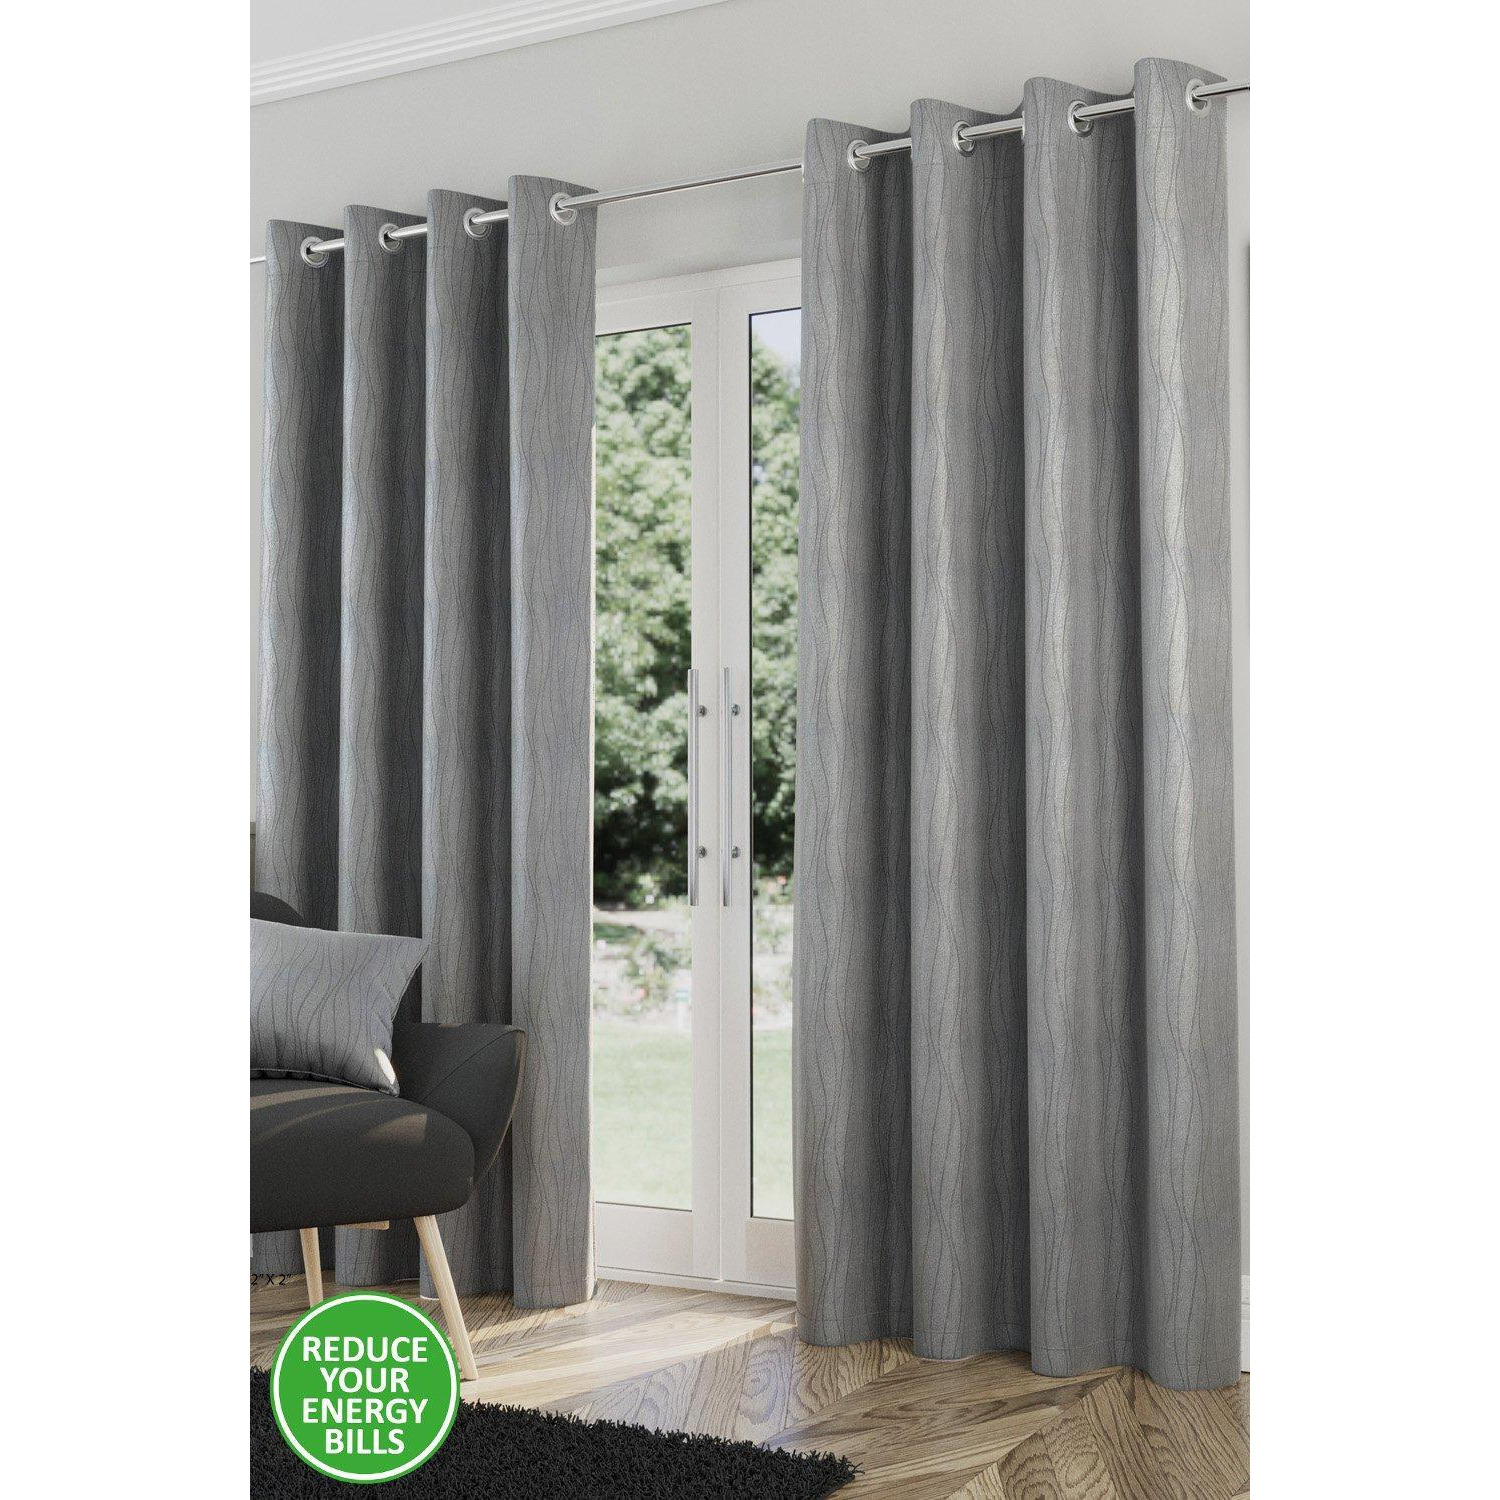 Goodwood - Thermal, Energy Saving, Dimout Eyelet Pair of Curtains with Wave Pattern - image 1